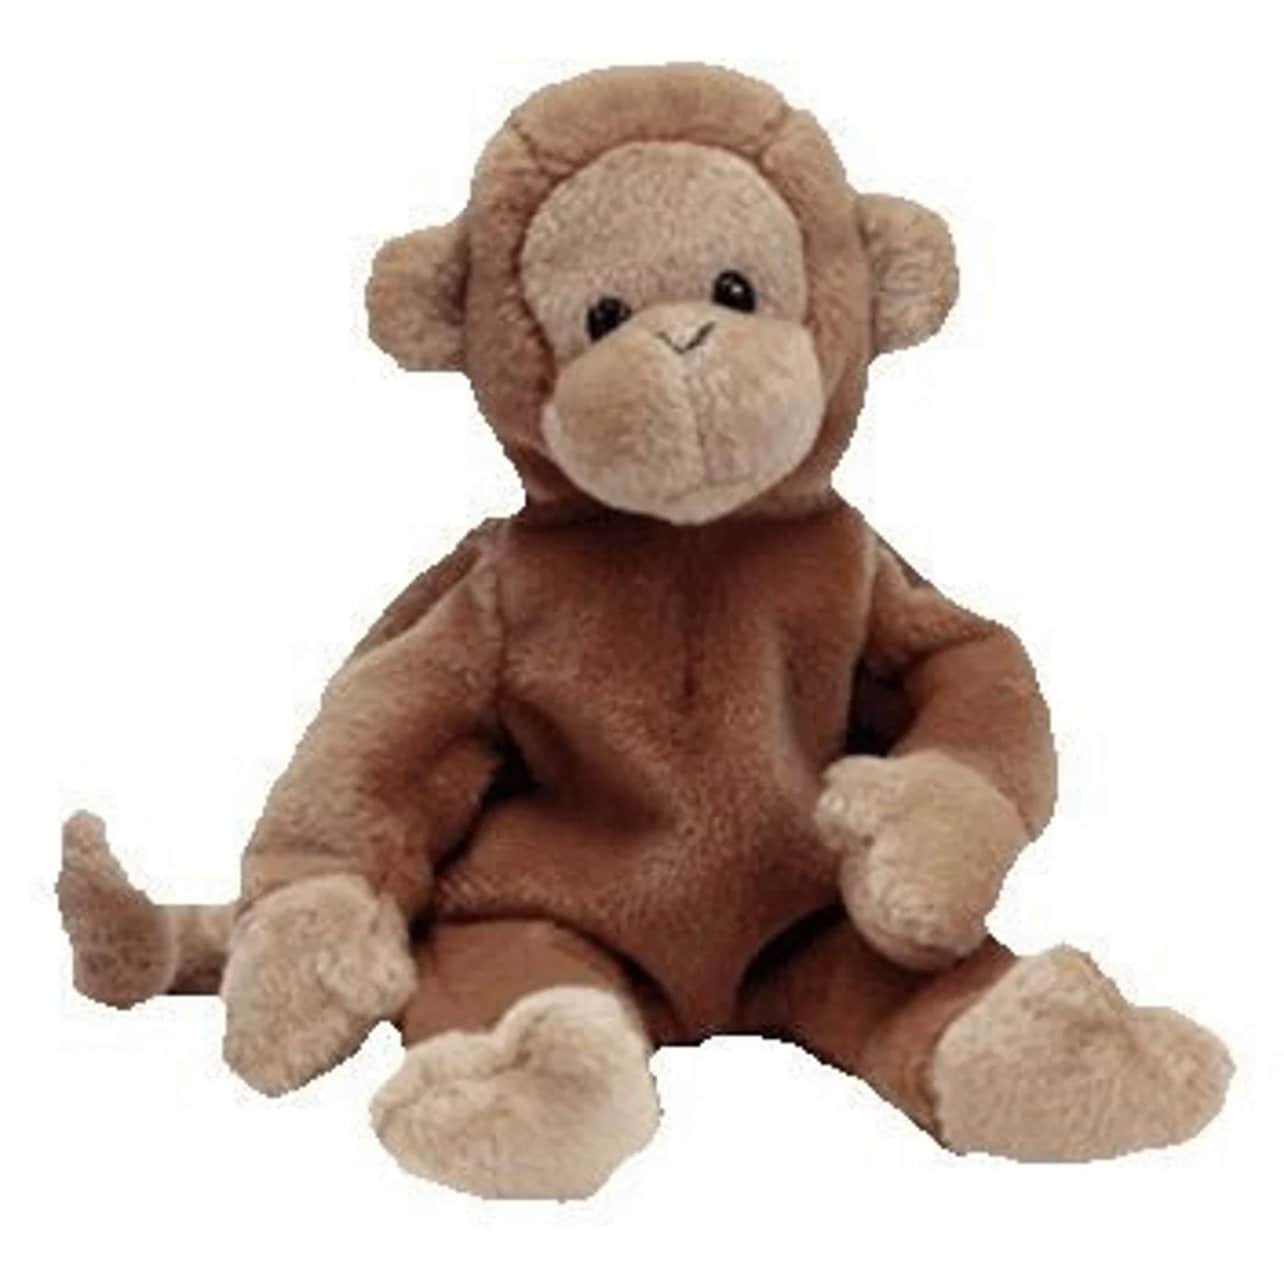 Ty Beanie Baby Bongo The Monkey Toy 4067 for sale online